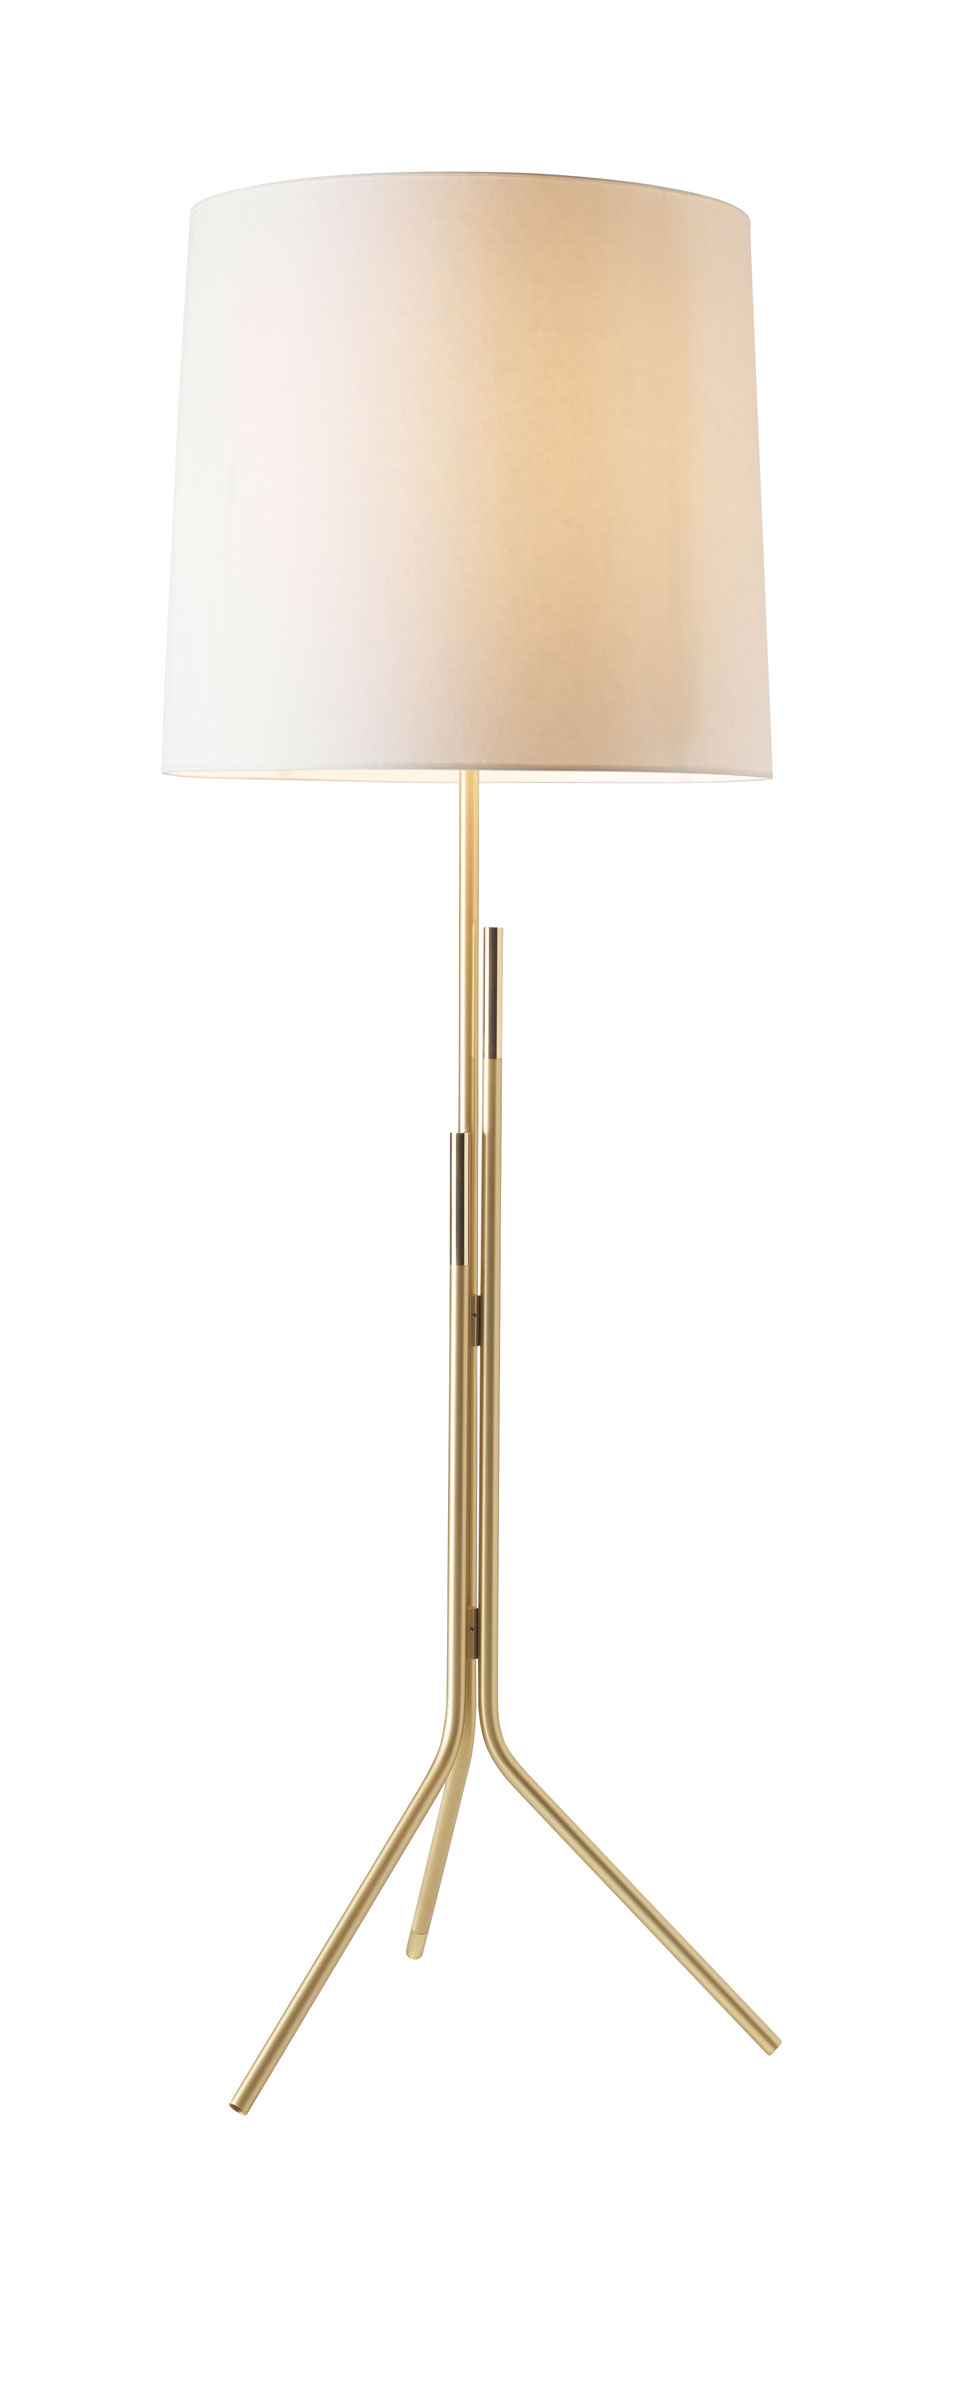 Contemporary Floor Lamp Brass Stand Cylindrical Shade In White Drop Paper Design Herv Langlais pertaining to sizing 960 X 2399